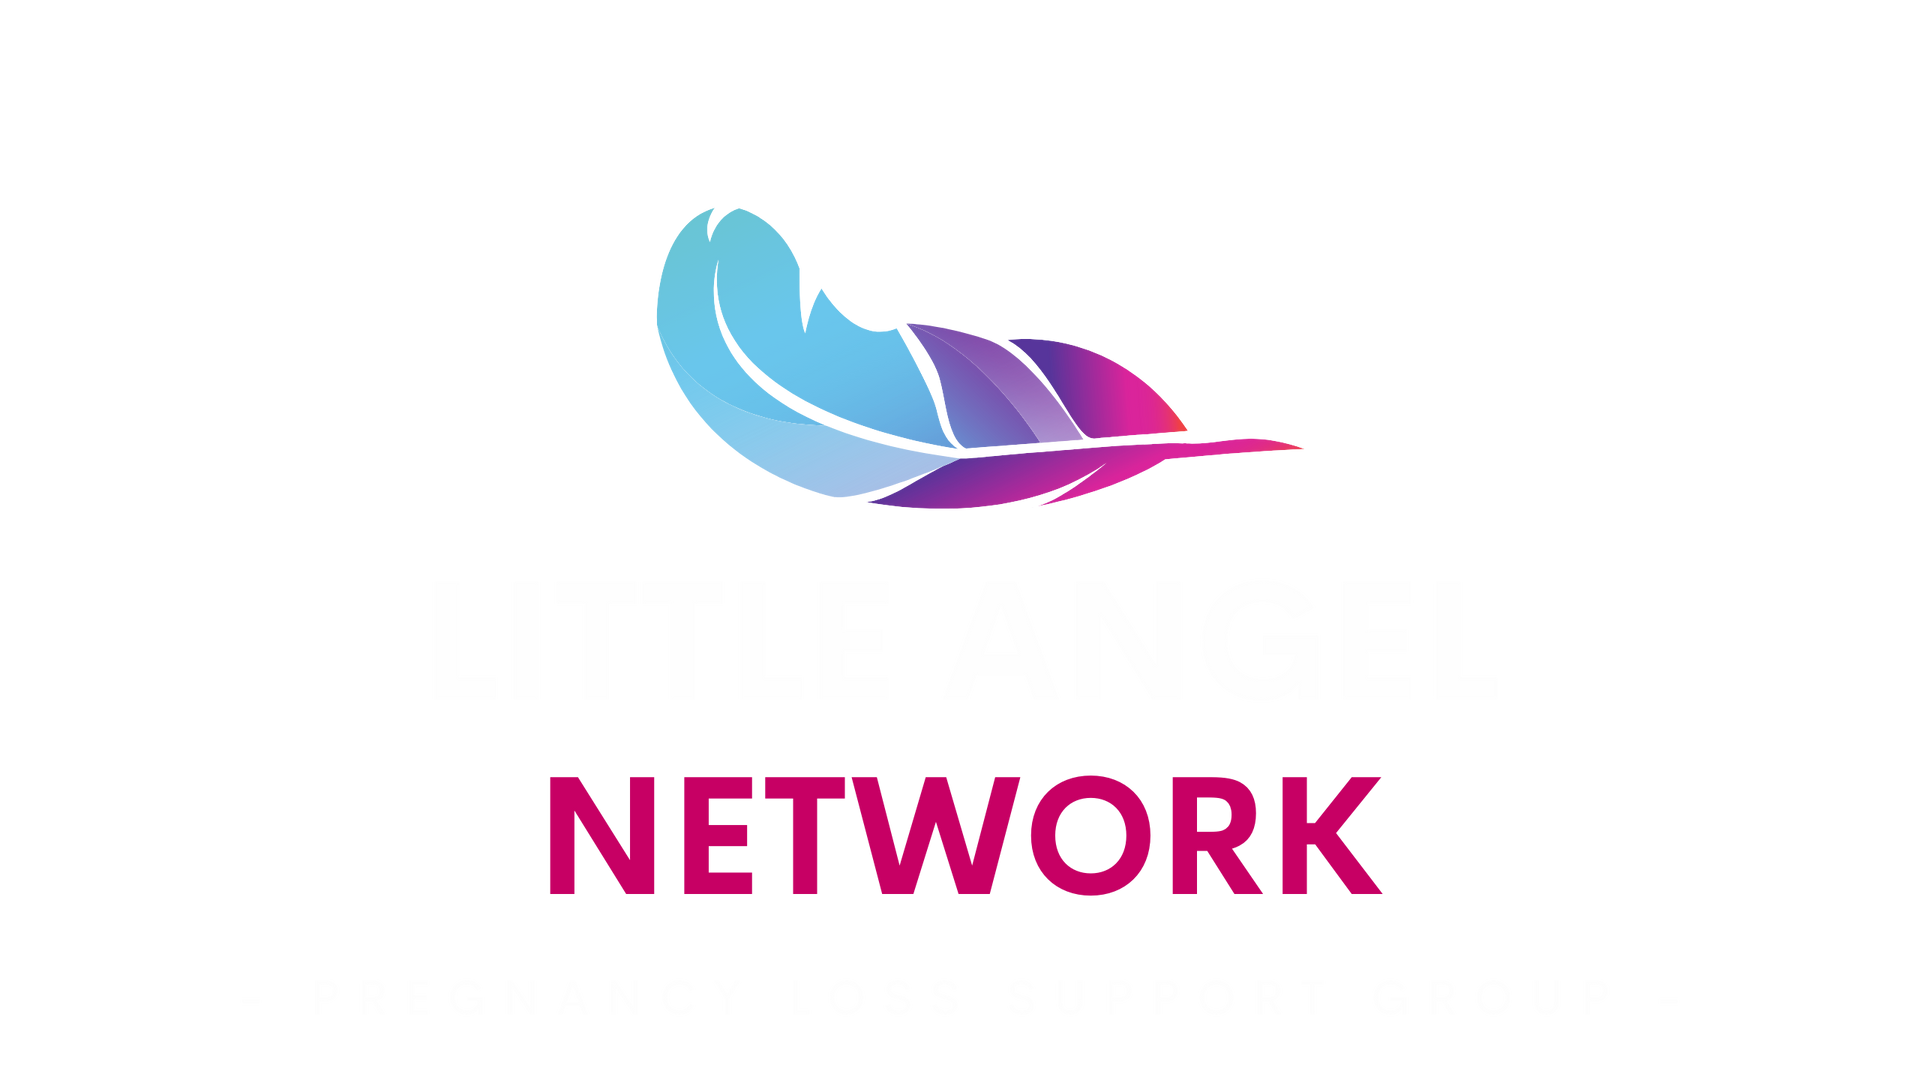 little angel network, pregnancy loss support group